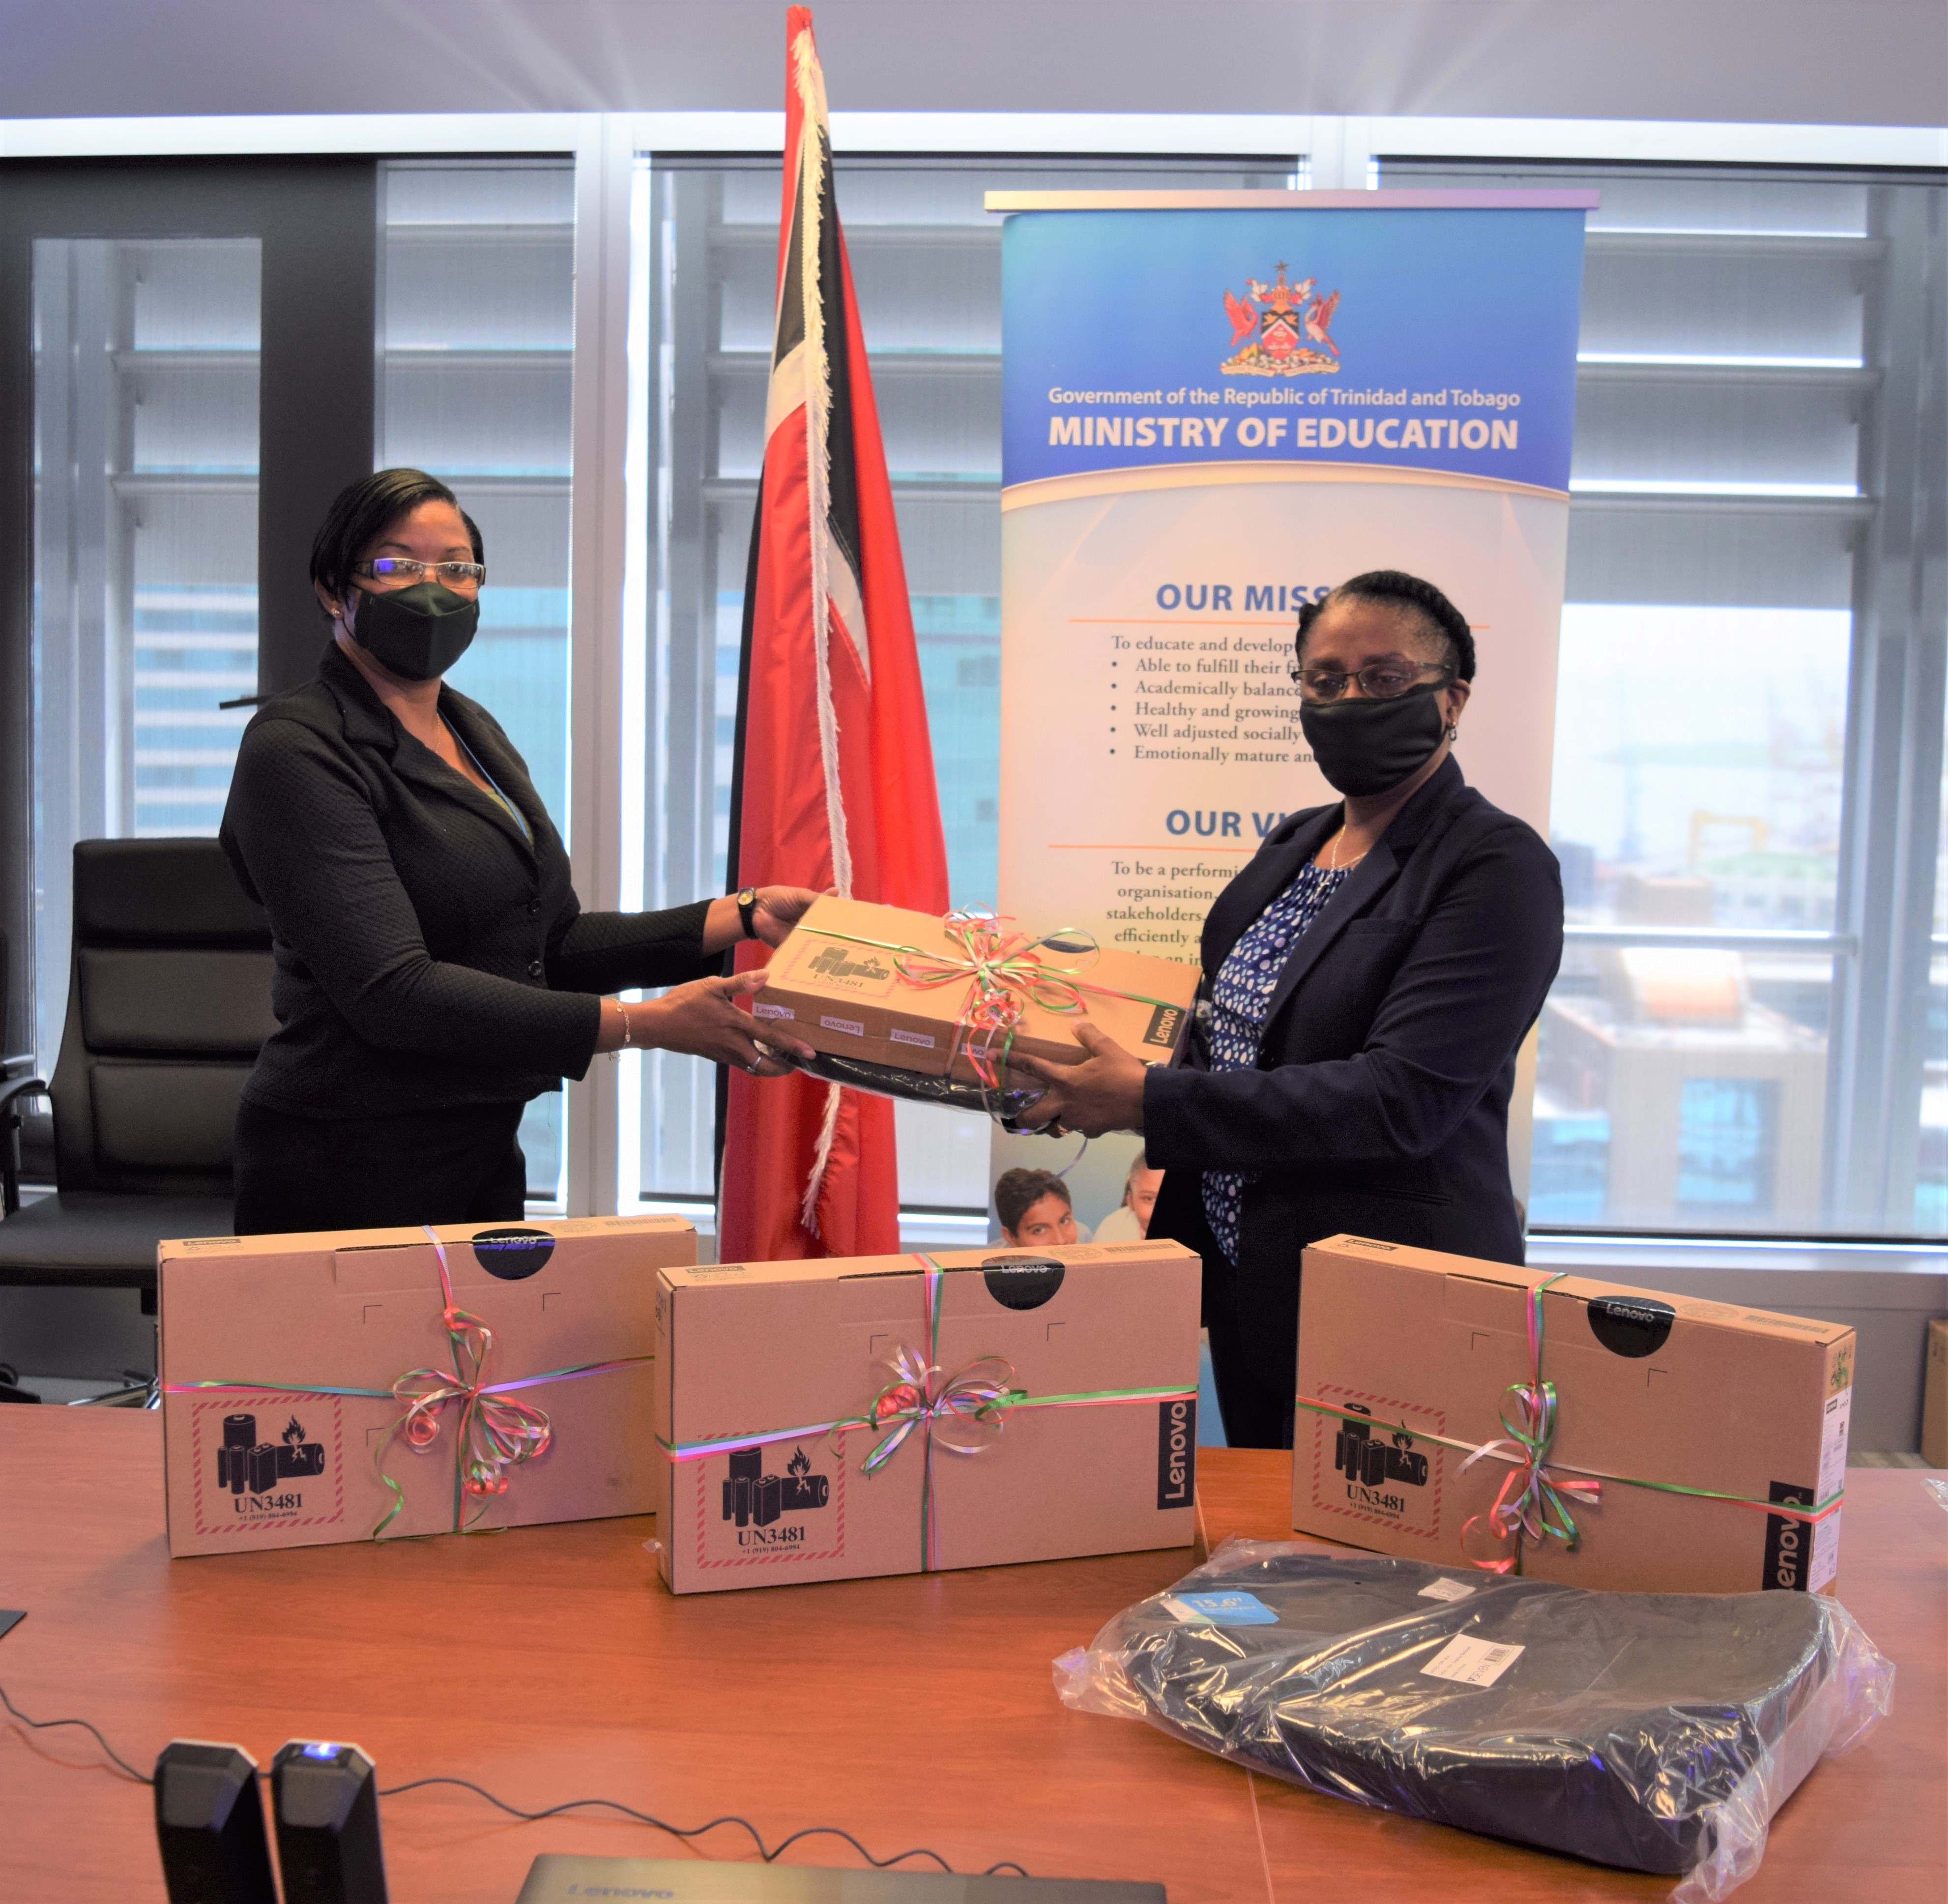 UN Delivers 350 Laptops to the Ministry of Education 